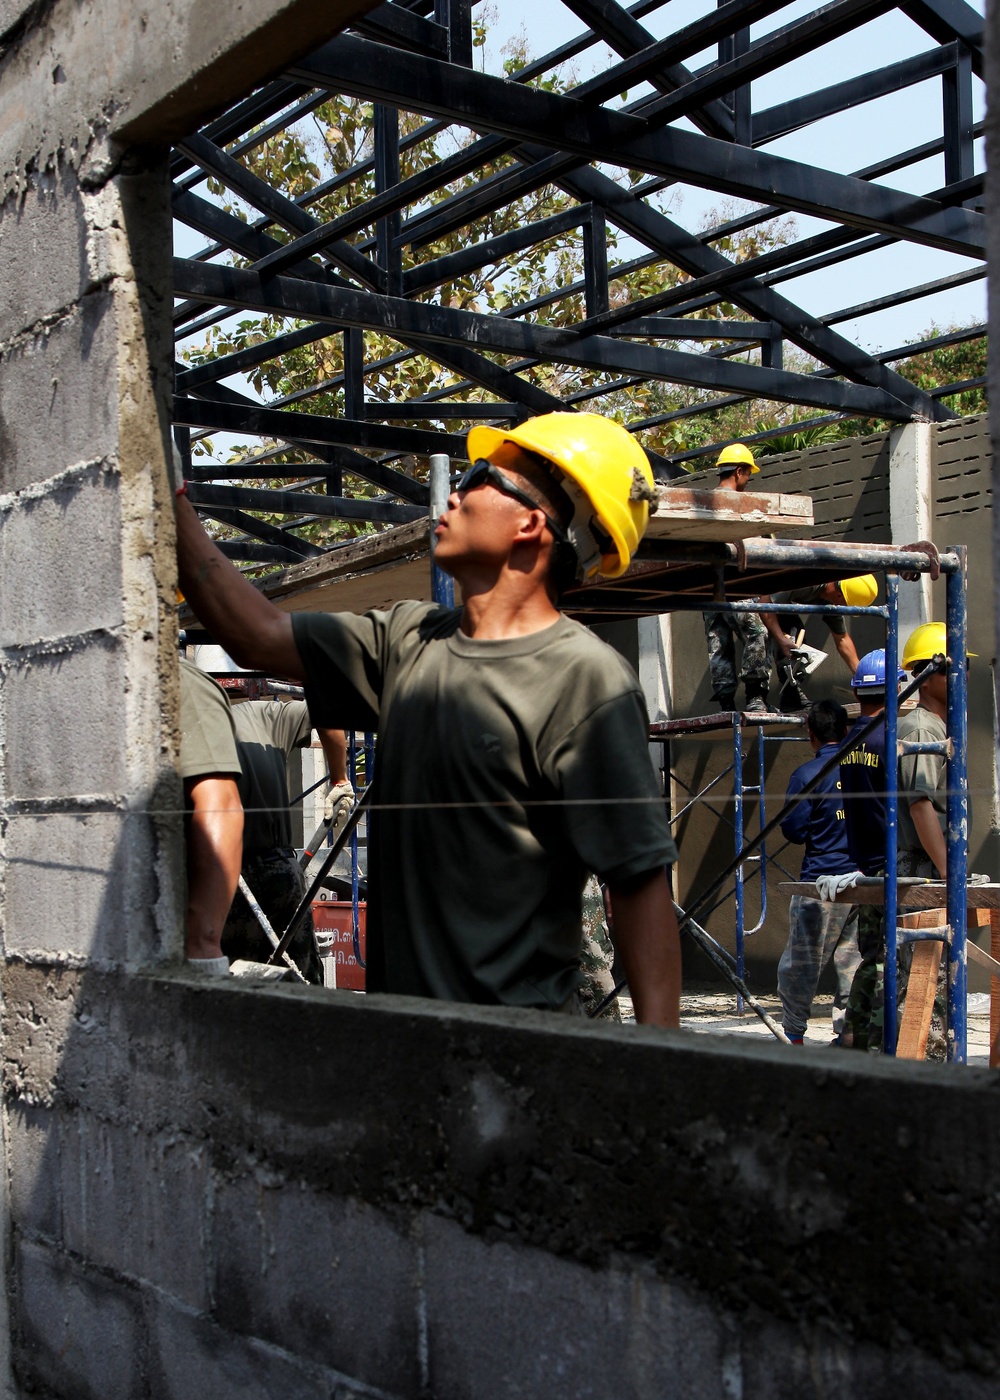 Multinational service members build school for Thai students